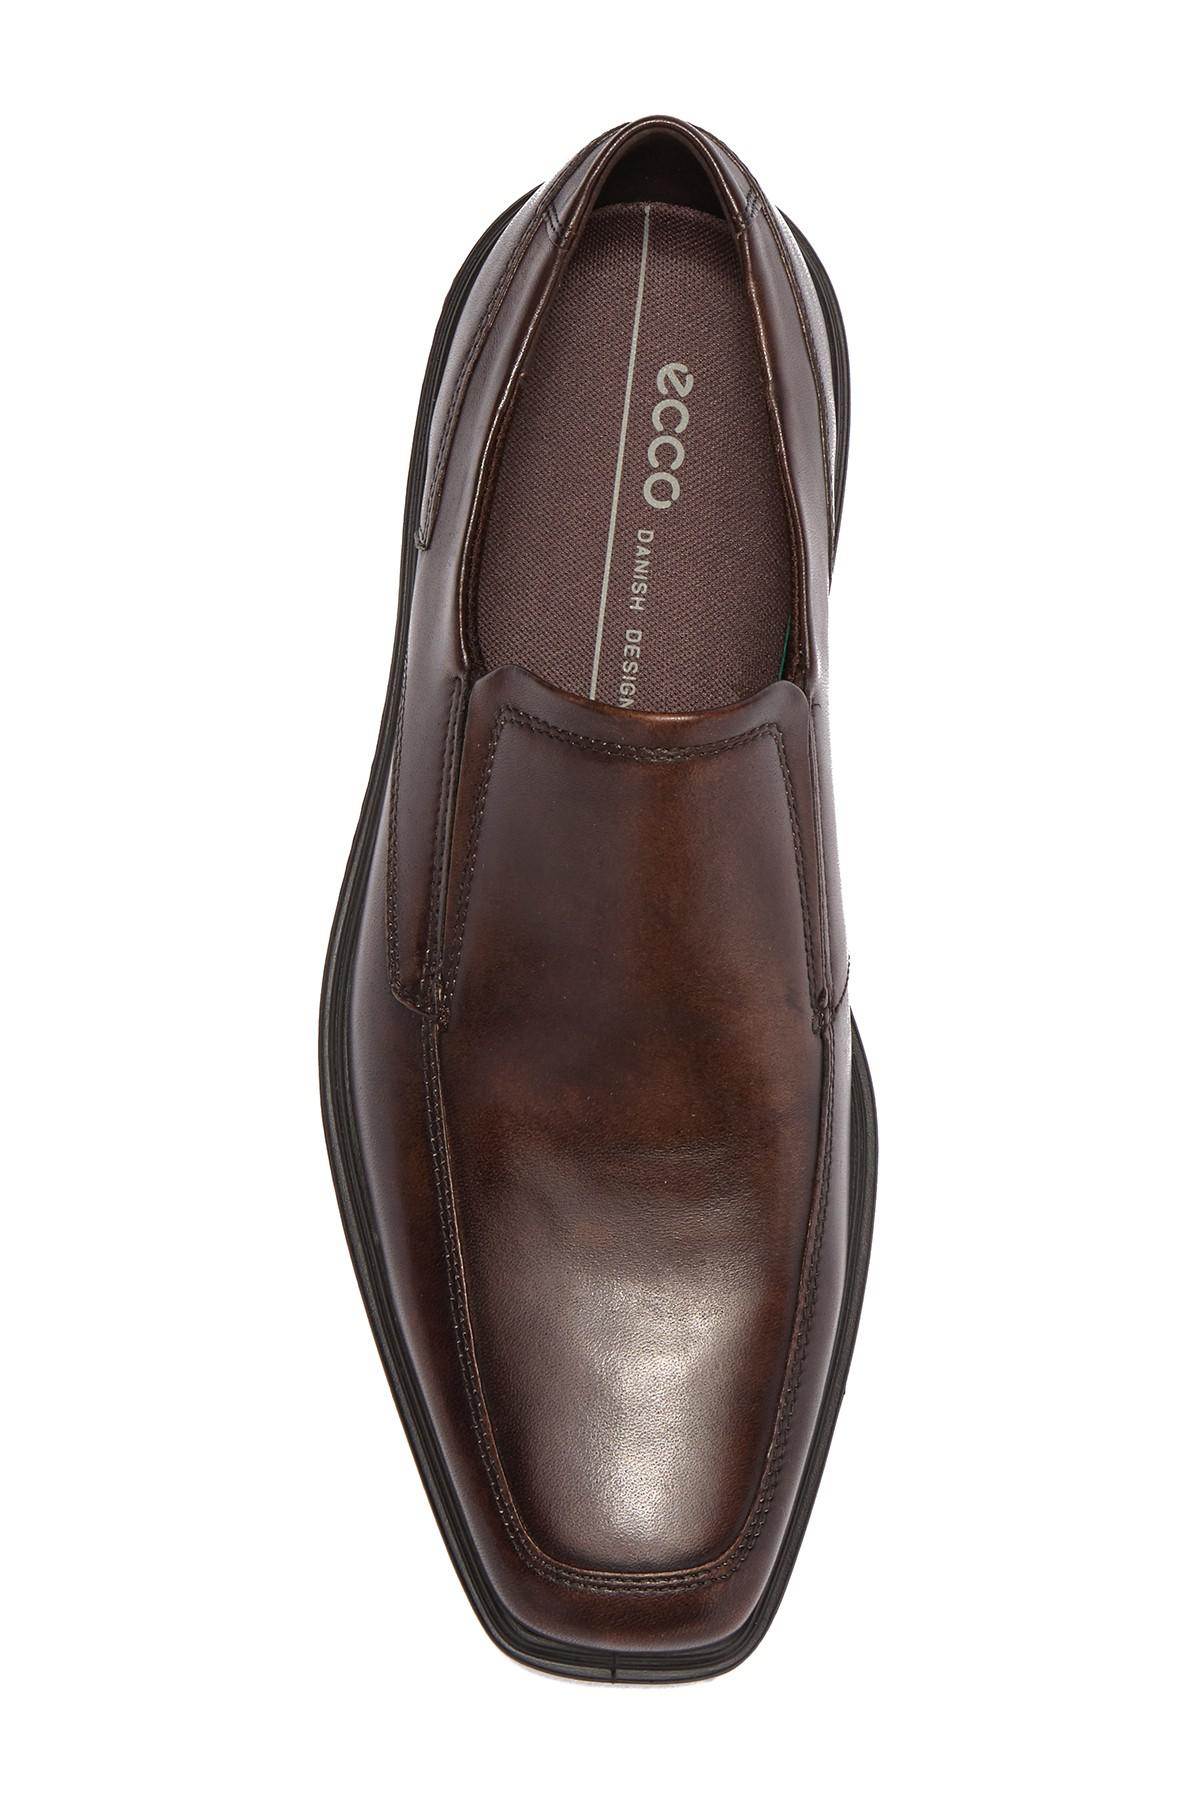 Ecco Leather Minneapolis Slip-on Loafer in Brown for Men - Lyst